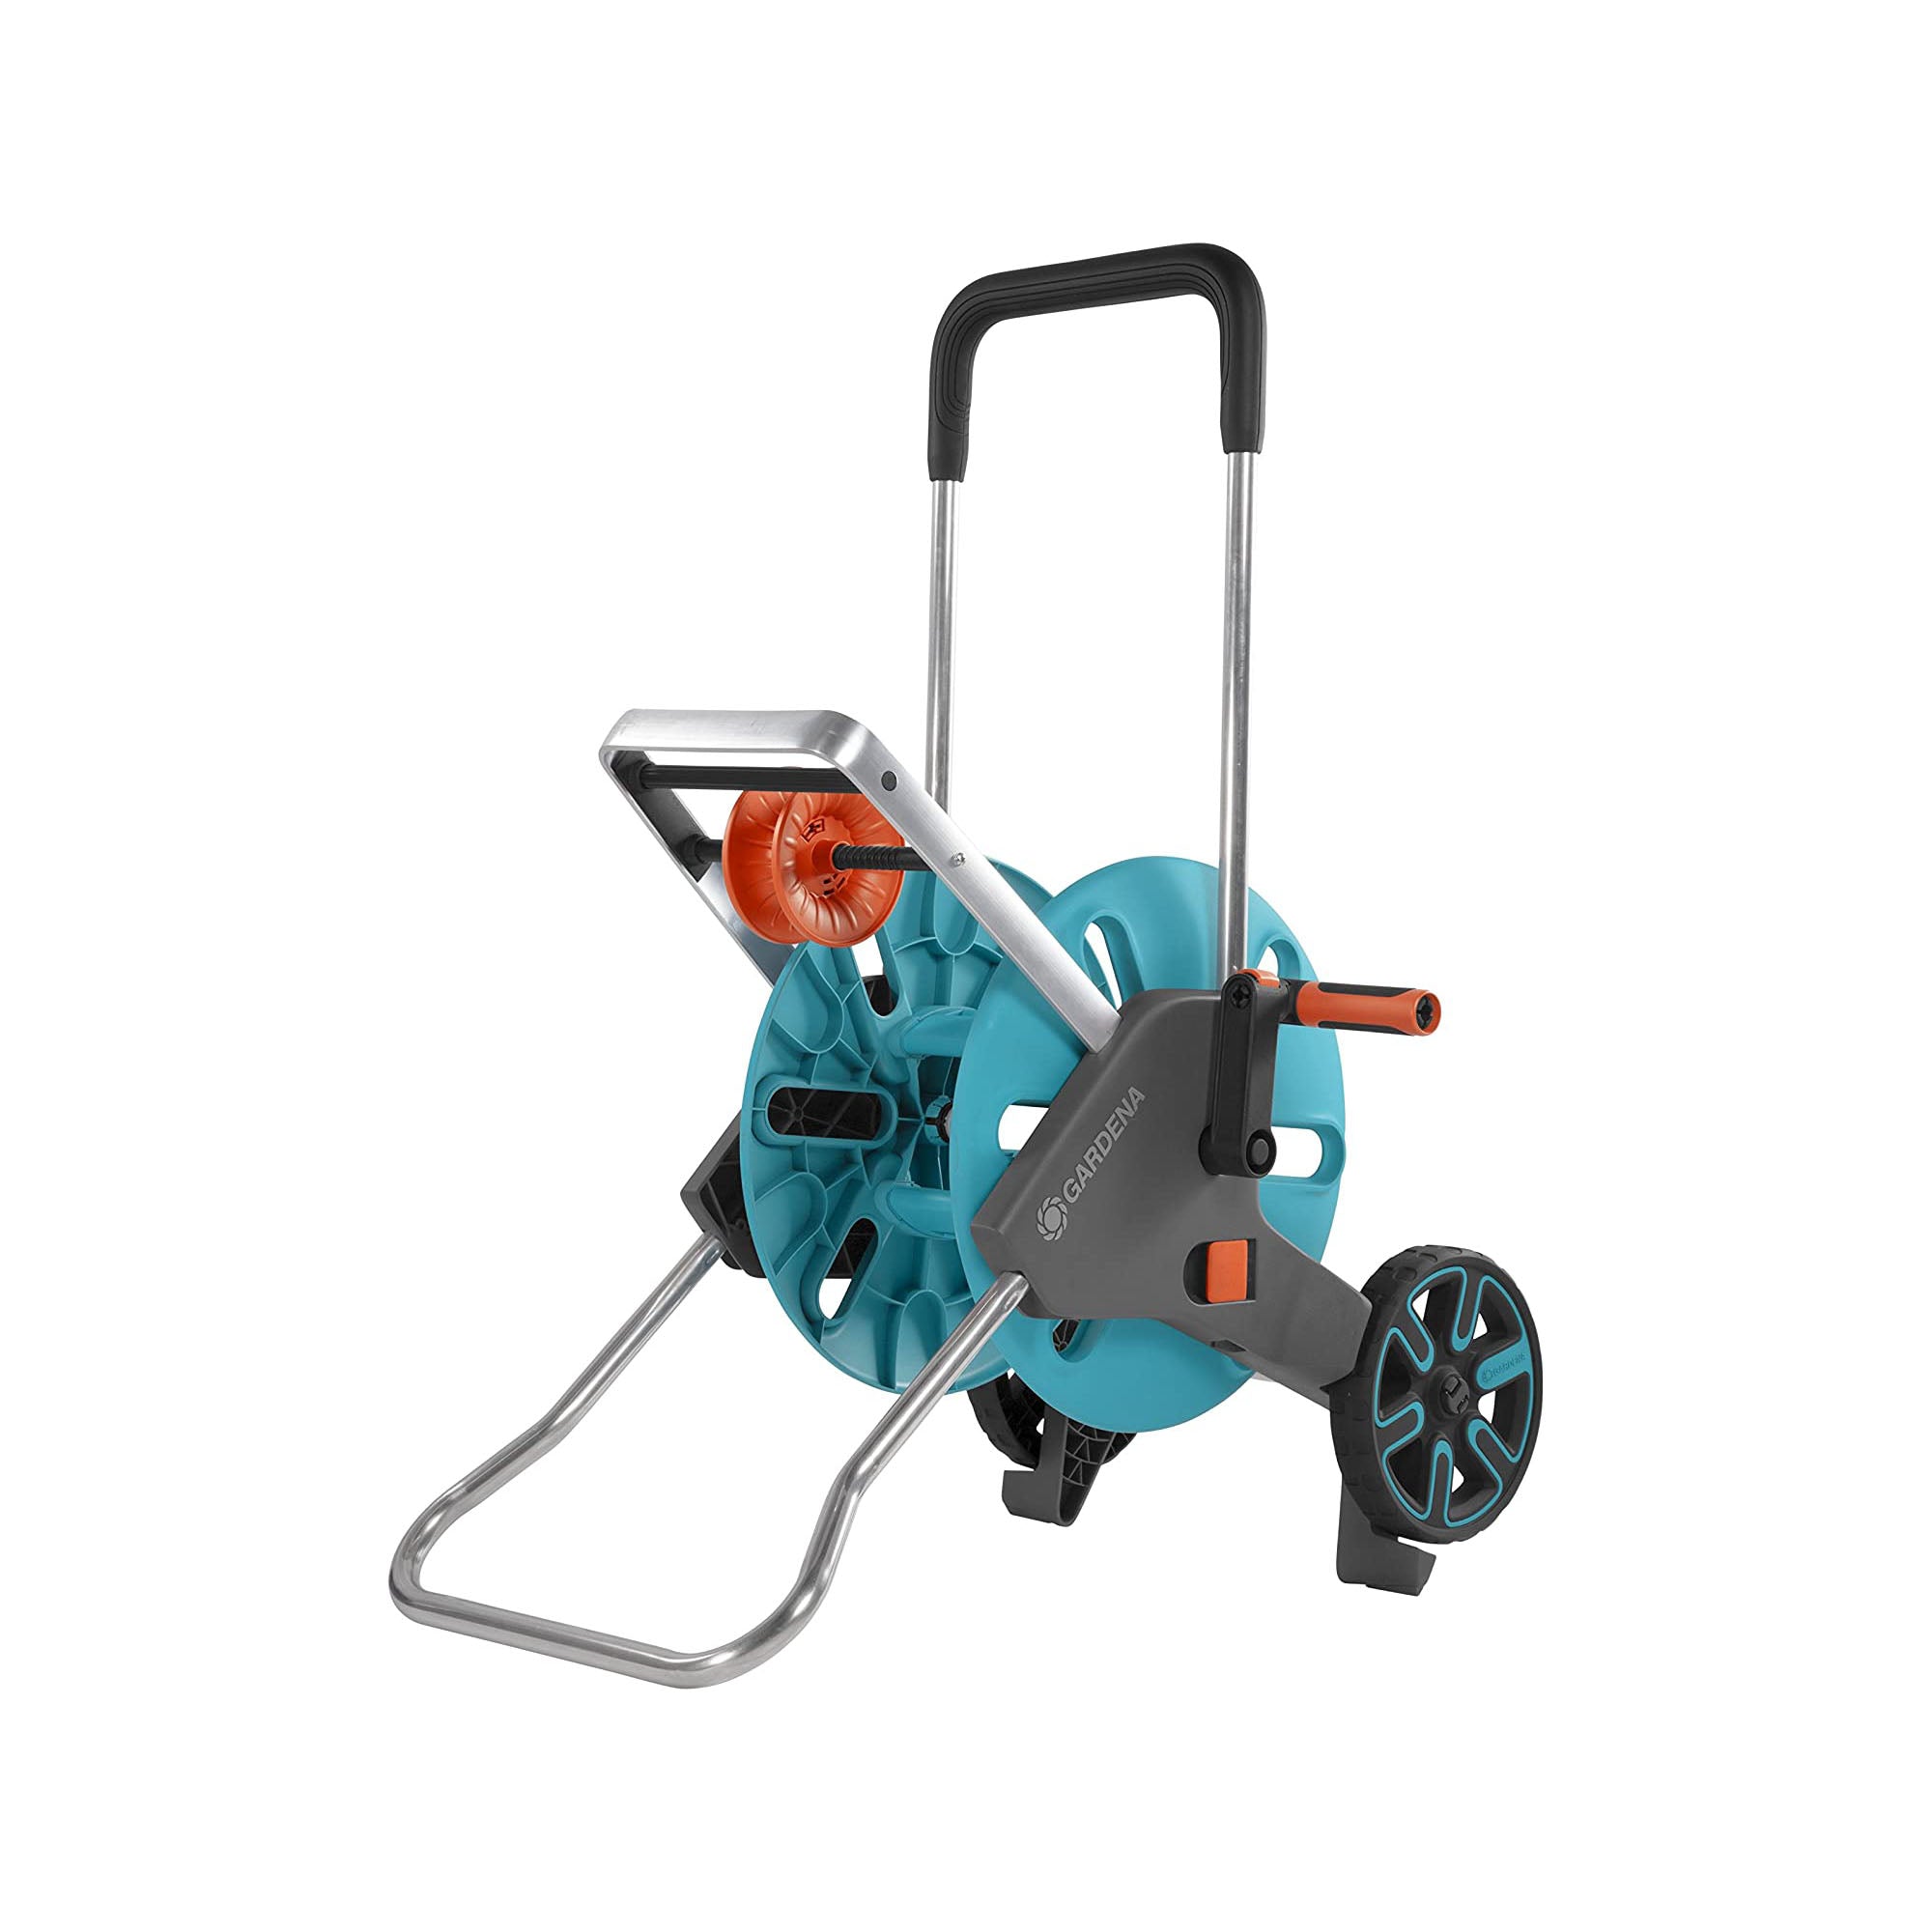 Hose Cart with Built-in Hose Guide